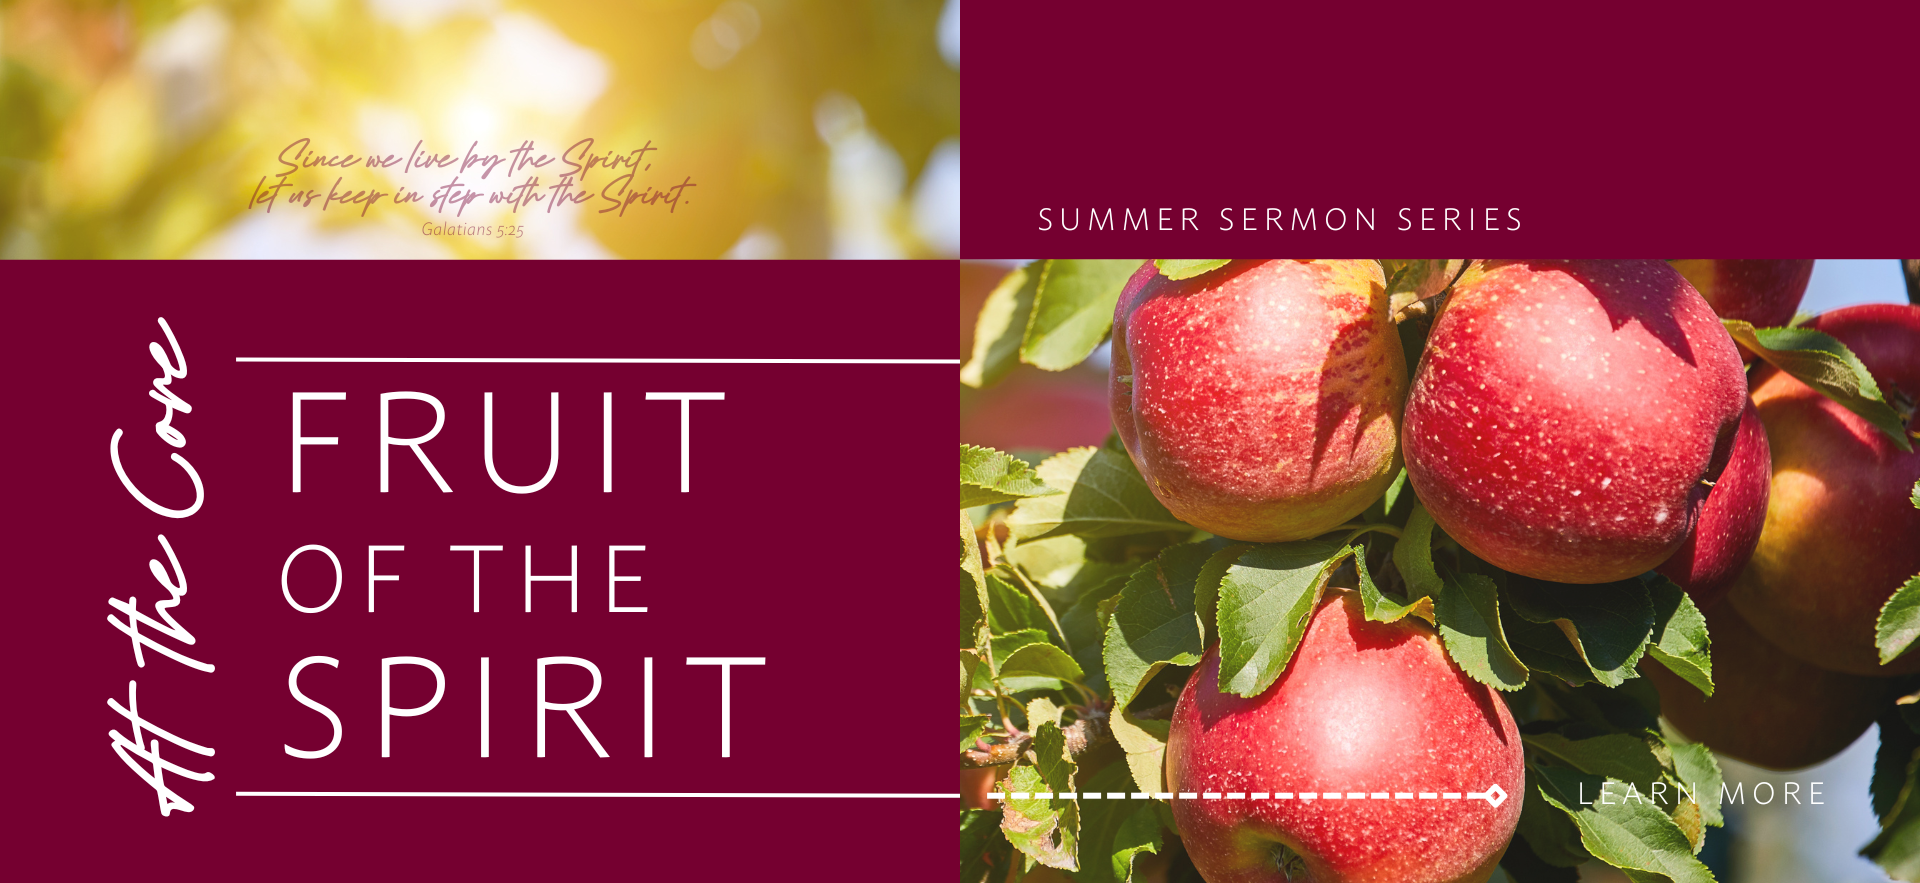 Fruit of the Spirit - web banner(1920 x 883 px).png